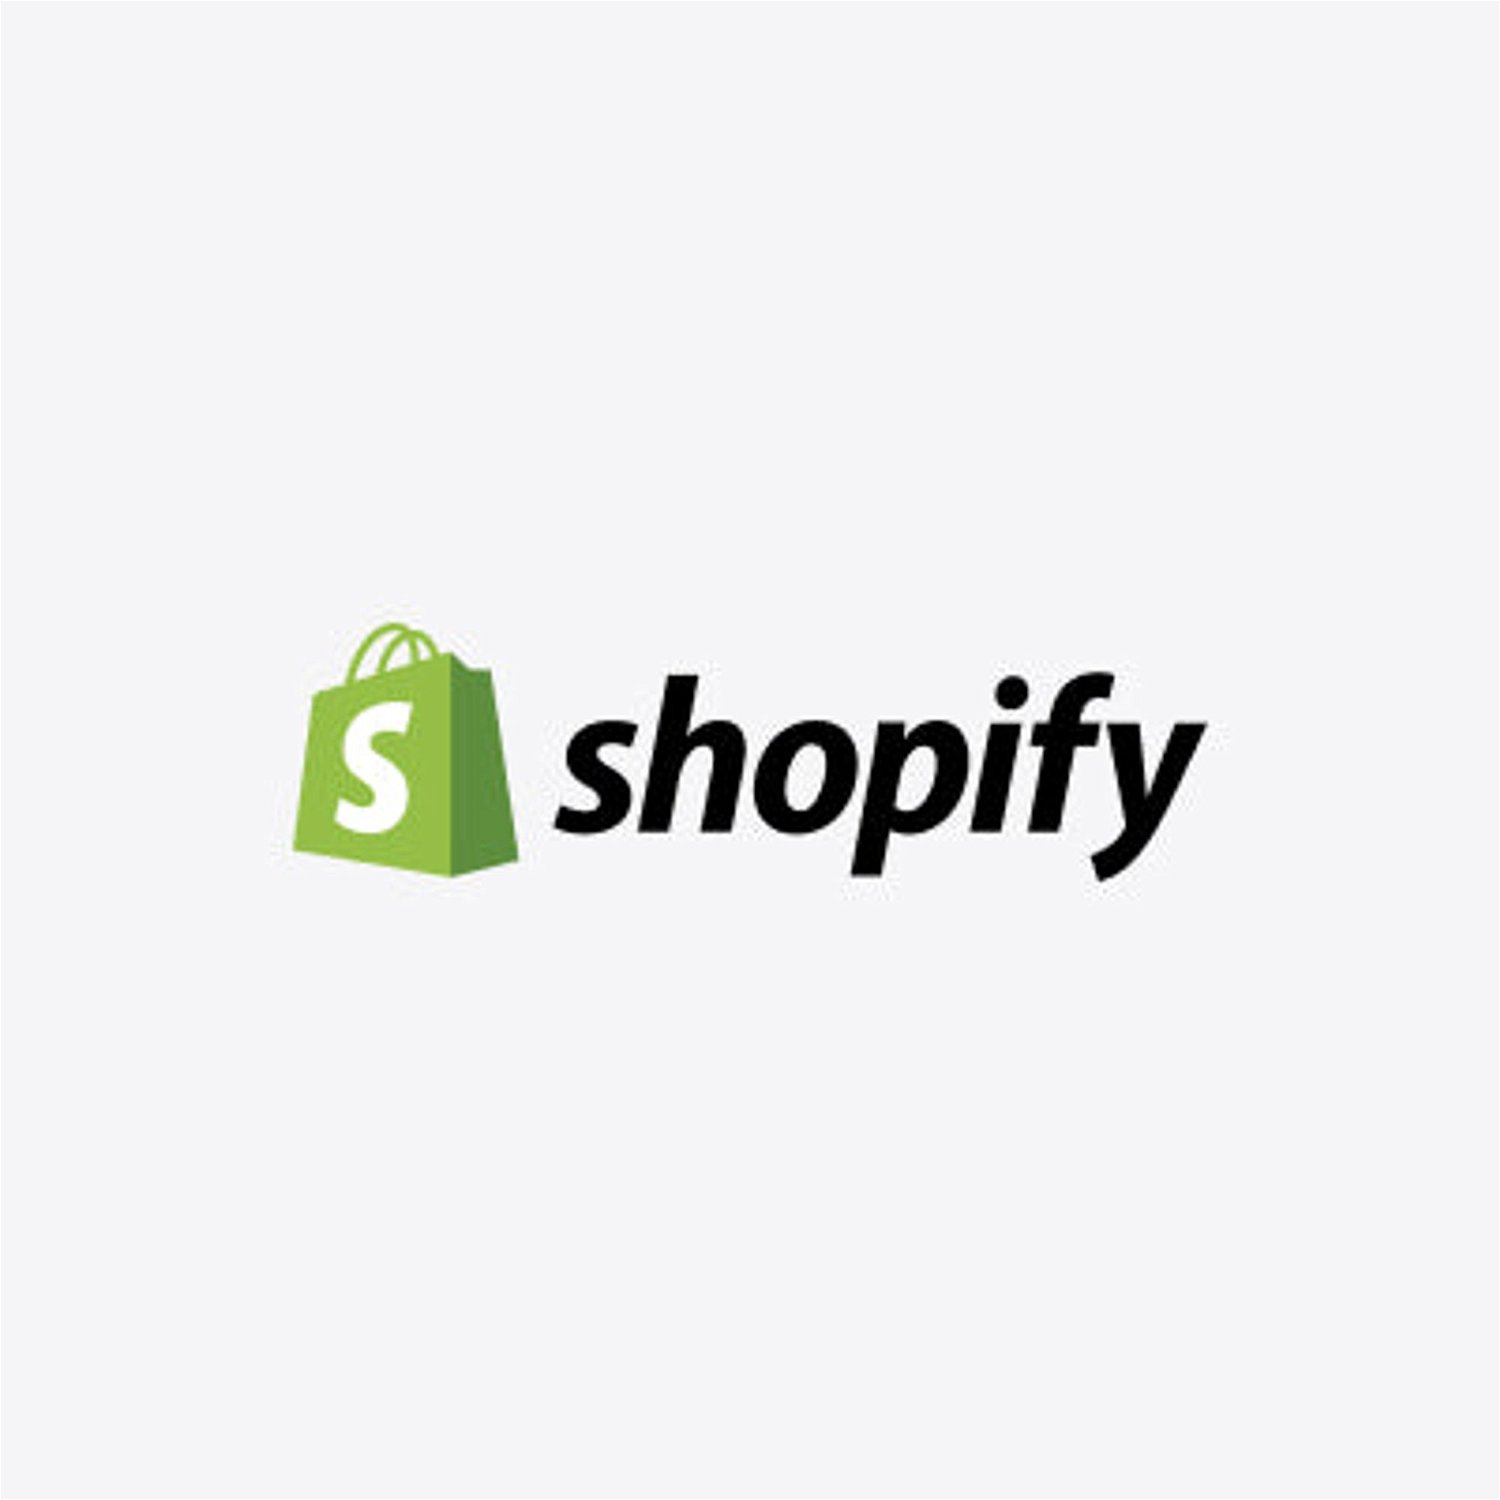 Shopify App Development - Tips and tricks for building Shopify apps